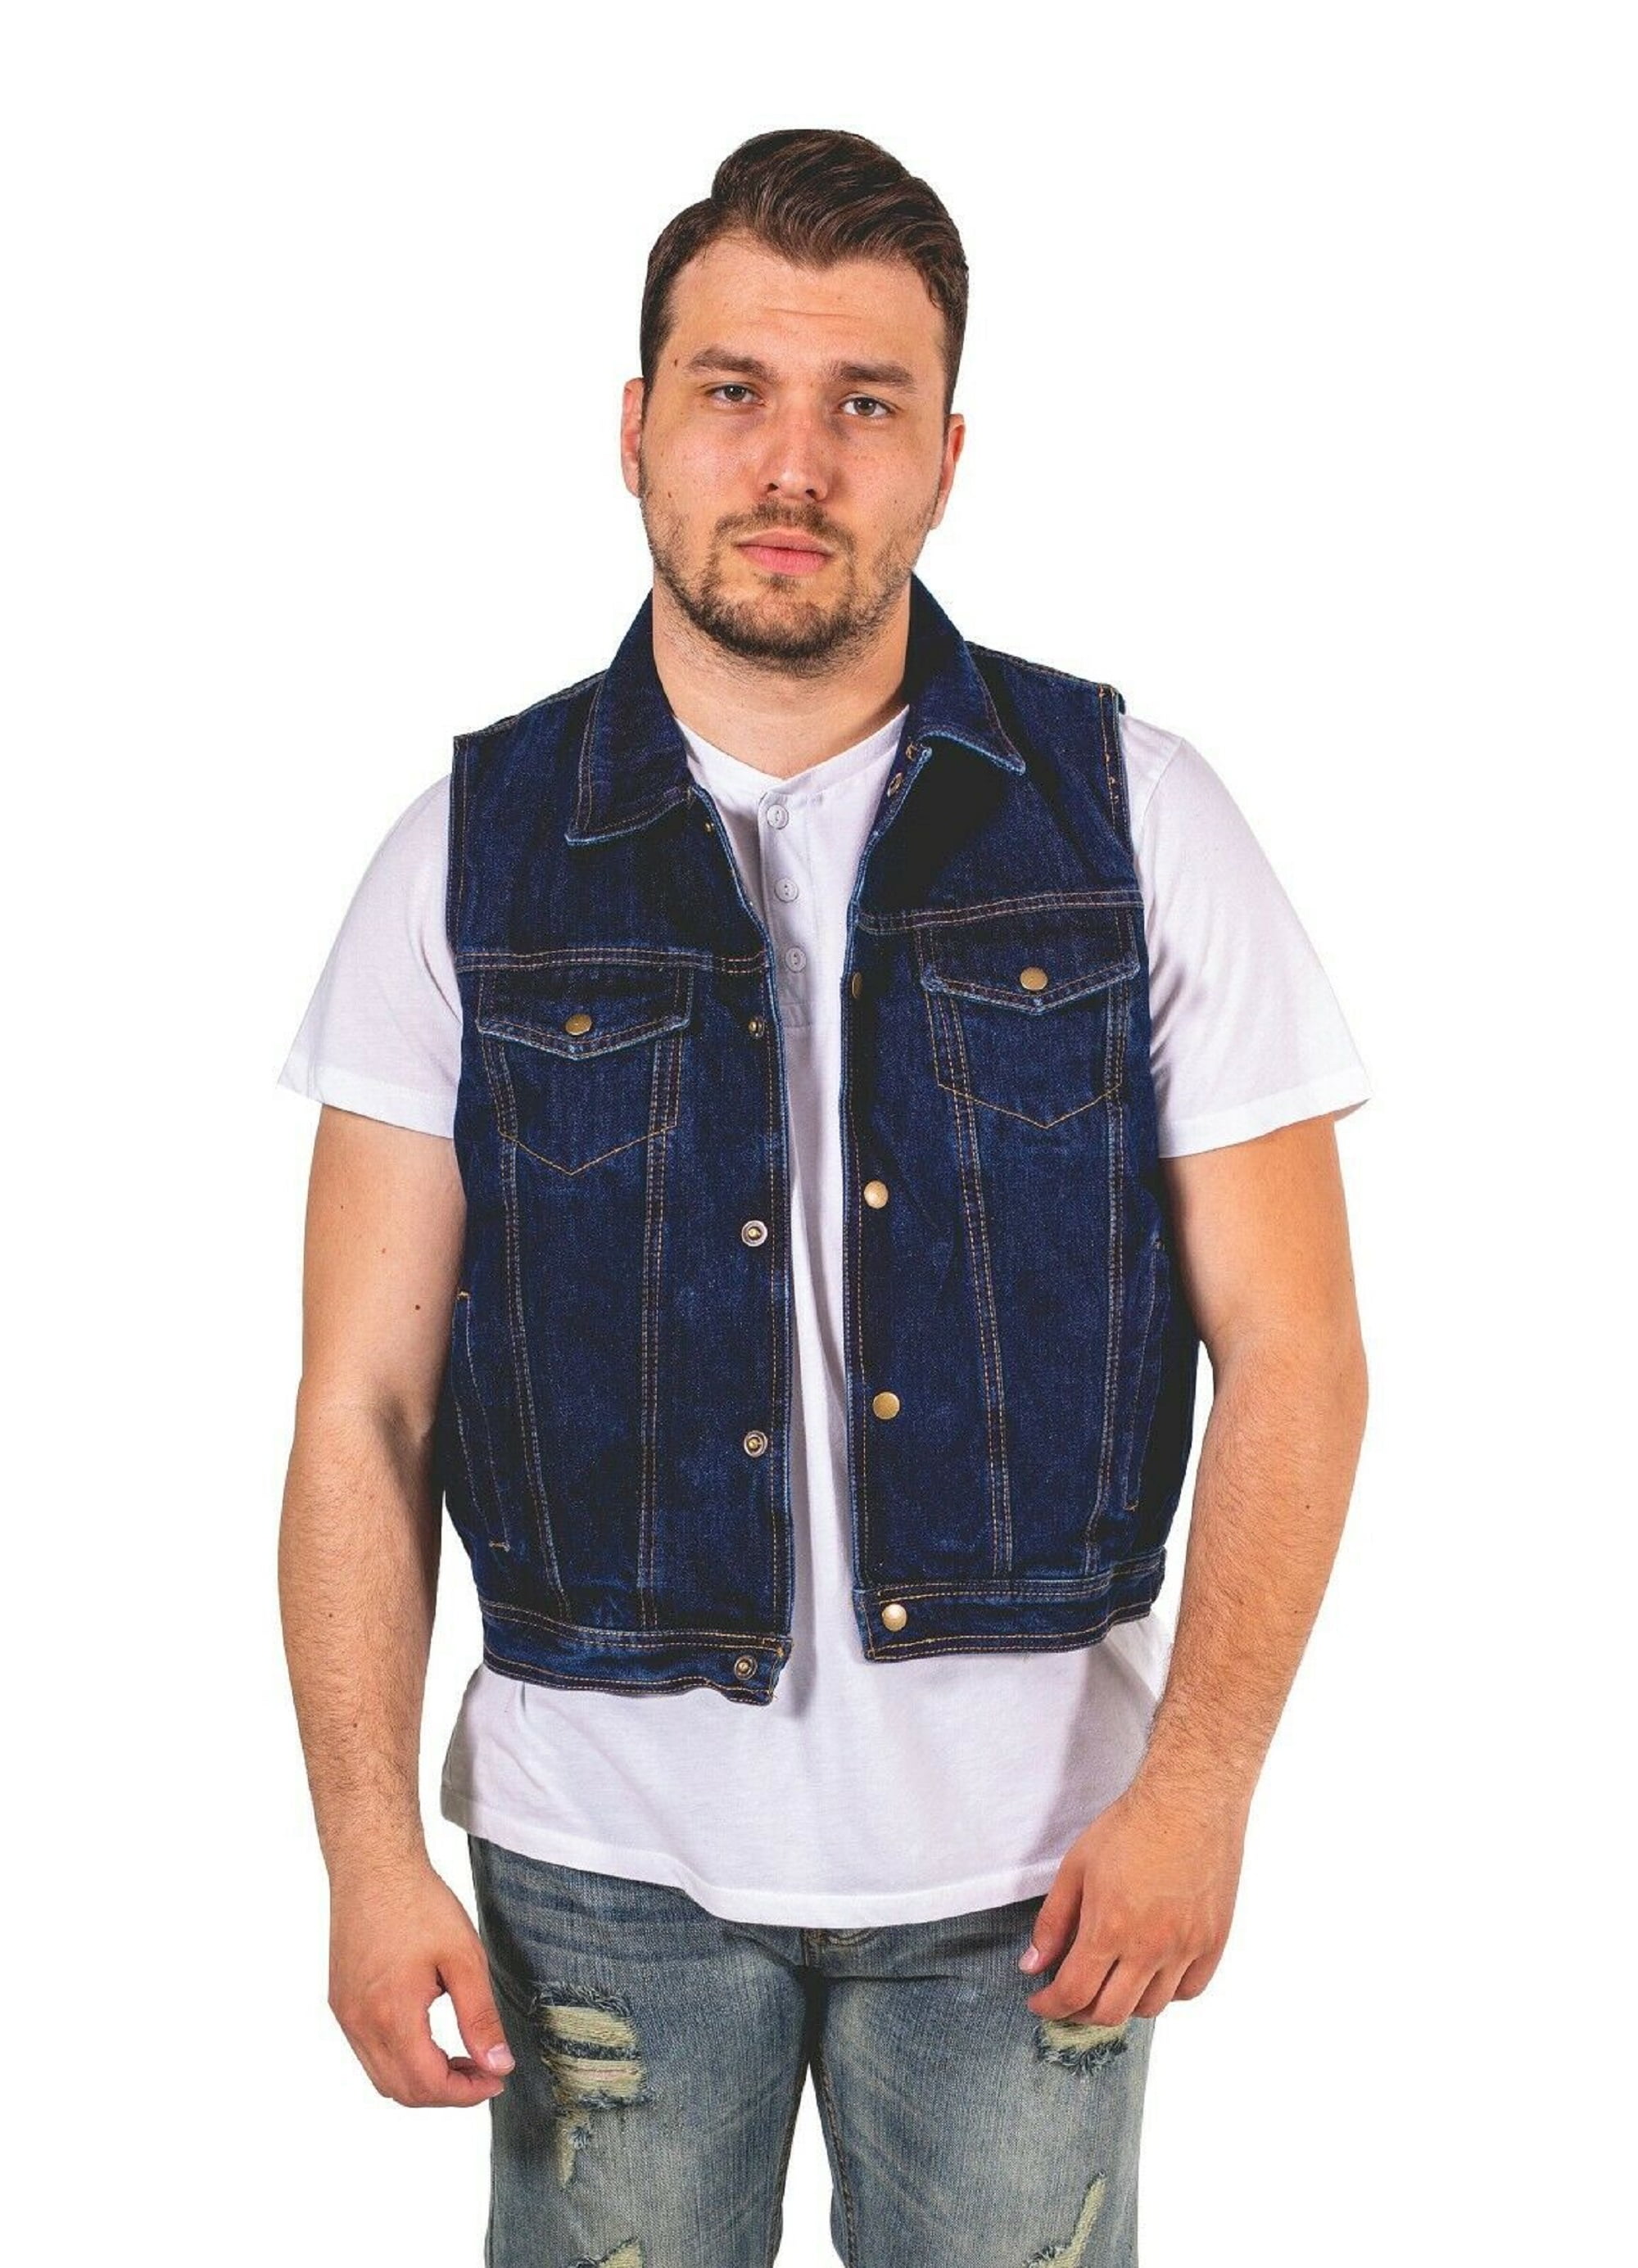 Men's Large Size Spring and Summer Cowboy Vest Waistcoat Leisure Denim Jacket Plain Transition Sleeveless Jacket Casual Chest Pocket Front with Button 